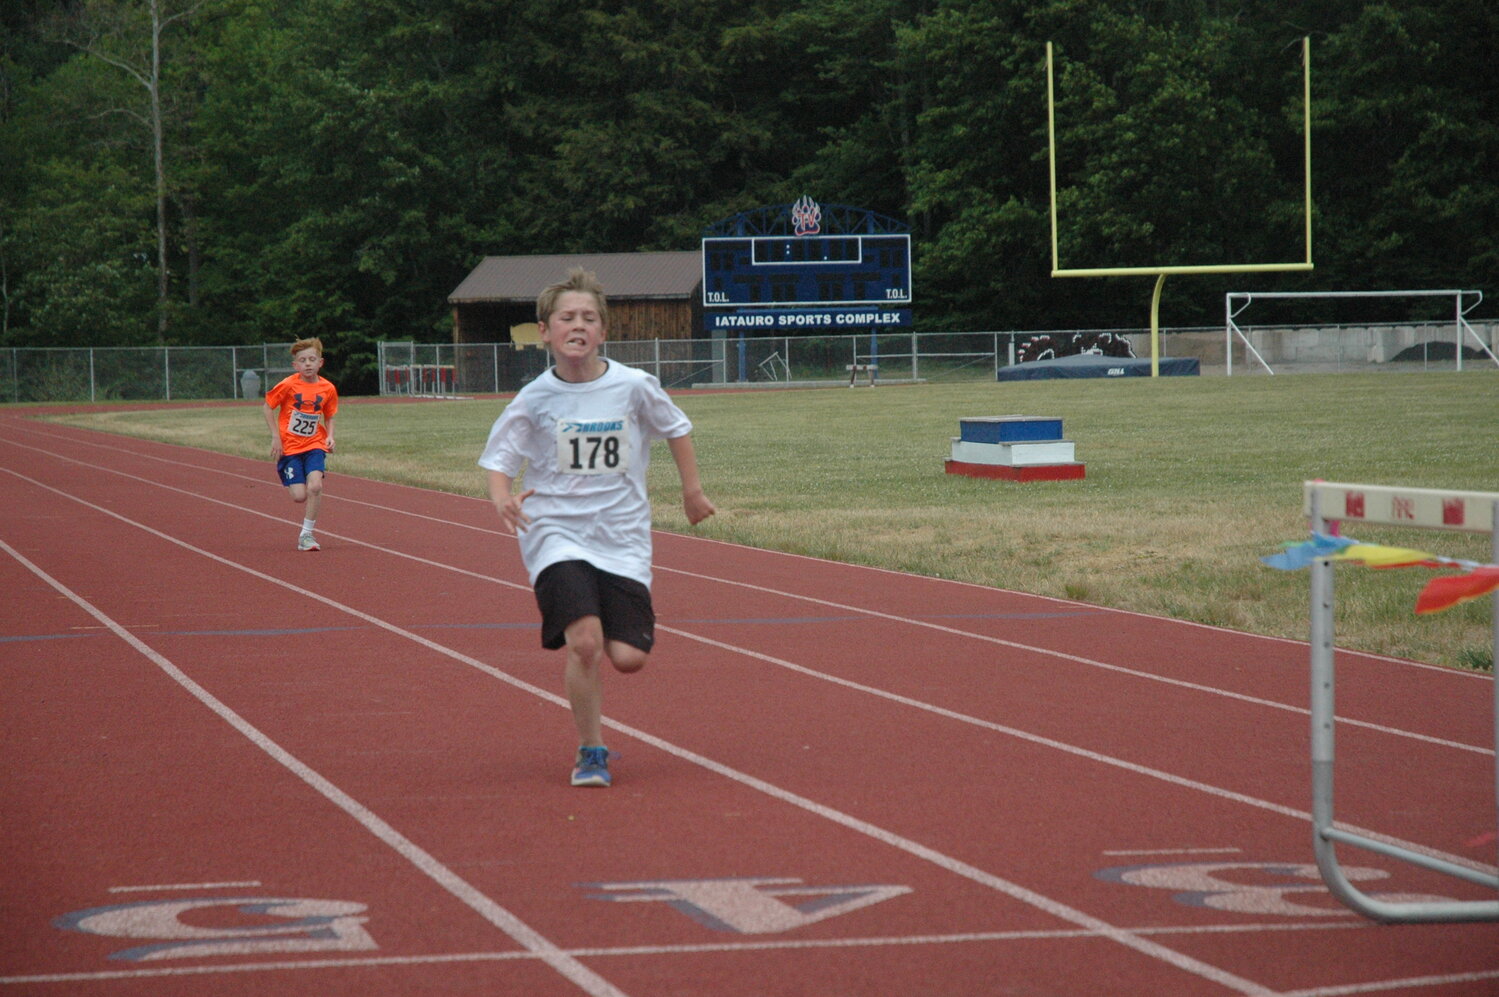 Chase Sheeley approaches the finish line with his friend, Bradley Kenney, right on his tail. The pair of future track stars duked it out for first place in the 1st Annual Veteran’s 5K at Tri-Valley Secondary School in Grahamsville.